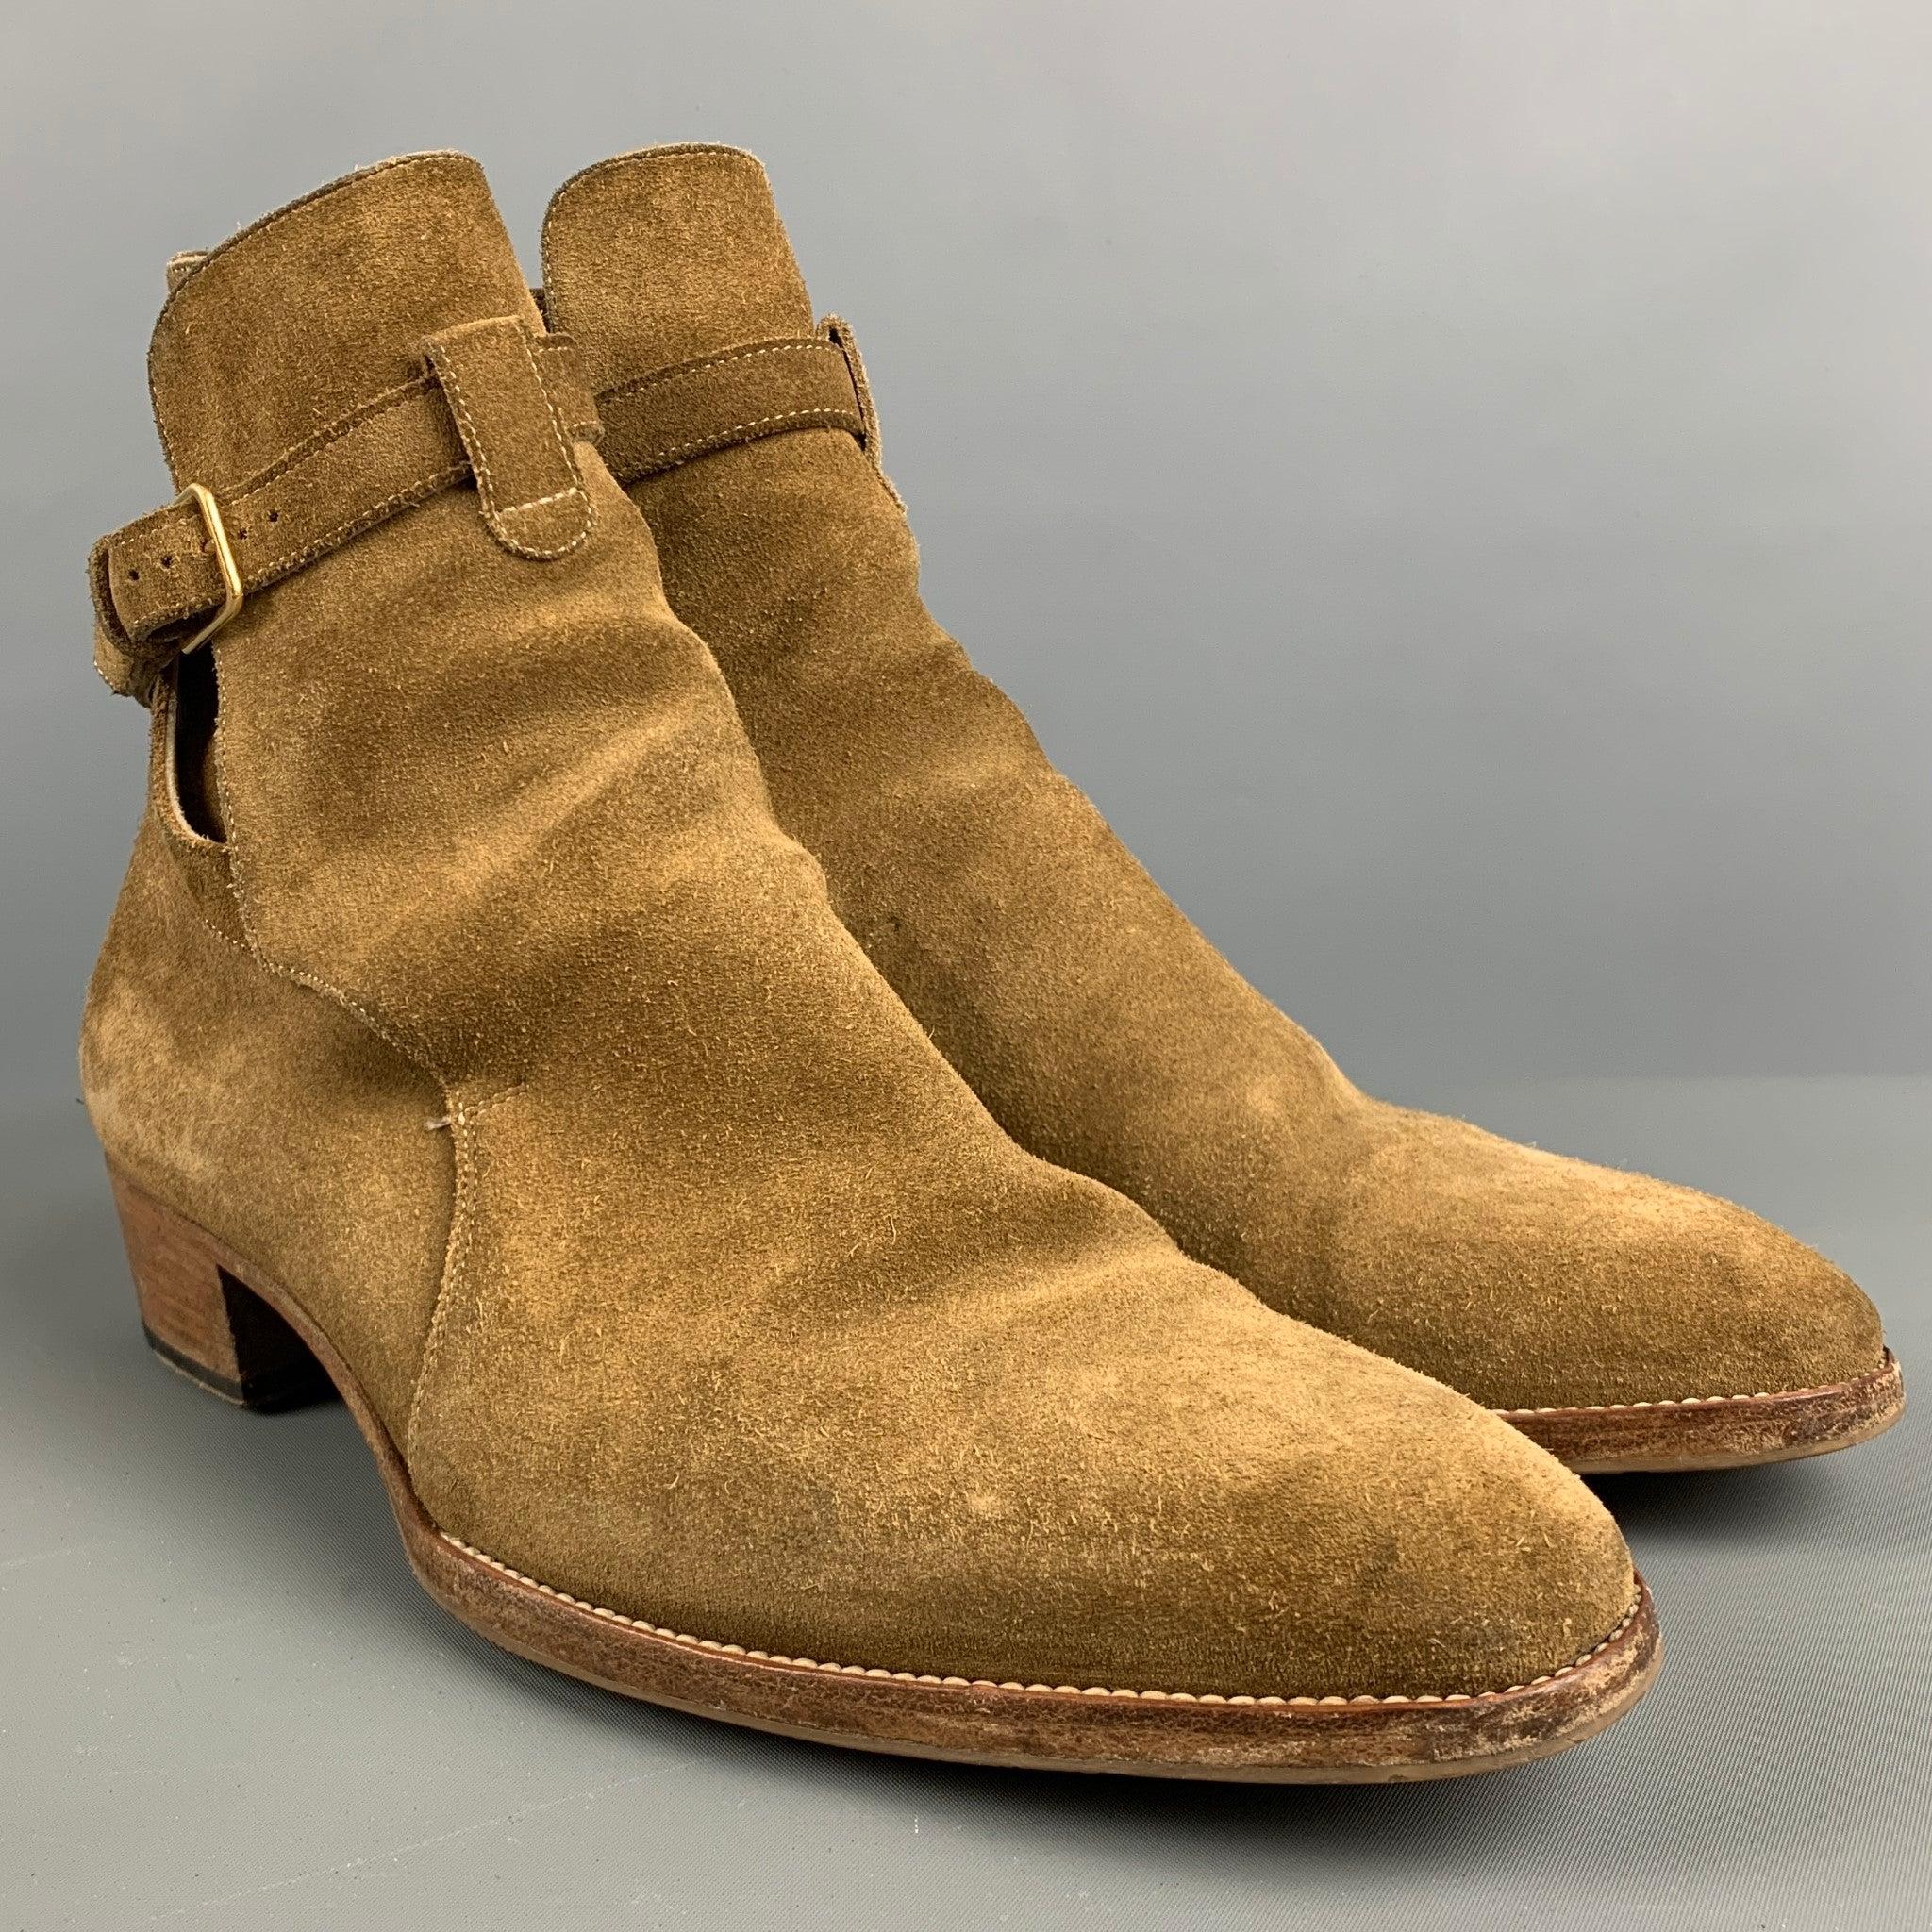 SAINT LAURENT WYATT JODHPUR boots in a tan suede featuring pointed toe, ankle style, and a wrap around strap. Comes with box. Made in Italy.Very Good Pre-Owned Condition. Moderate signs of wear. 

Marked:   IT 40 

Measurements: 
  Length: 10 inches